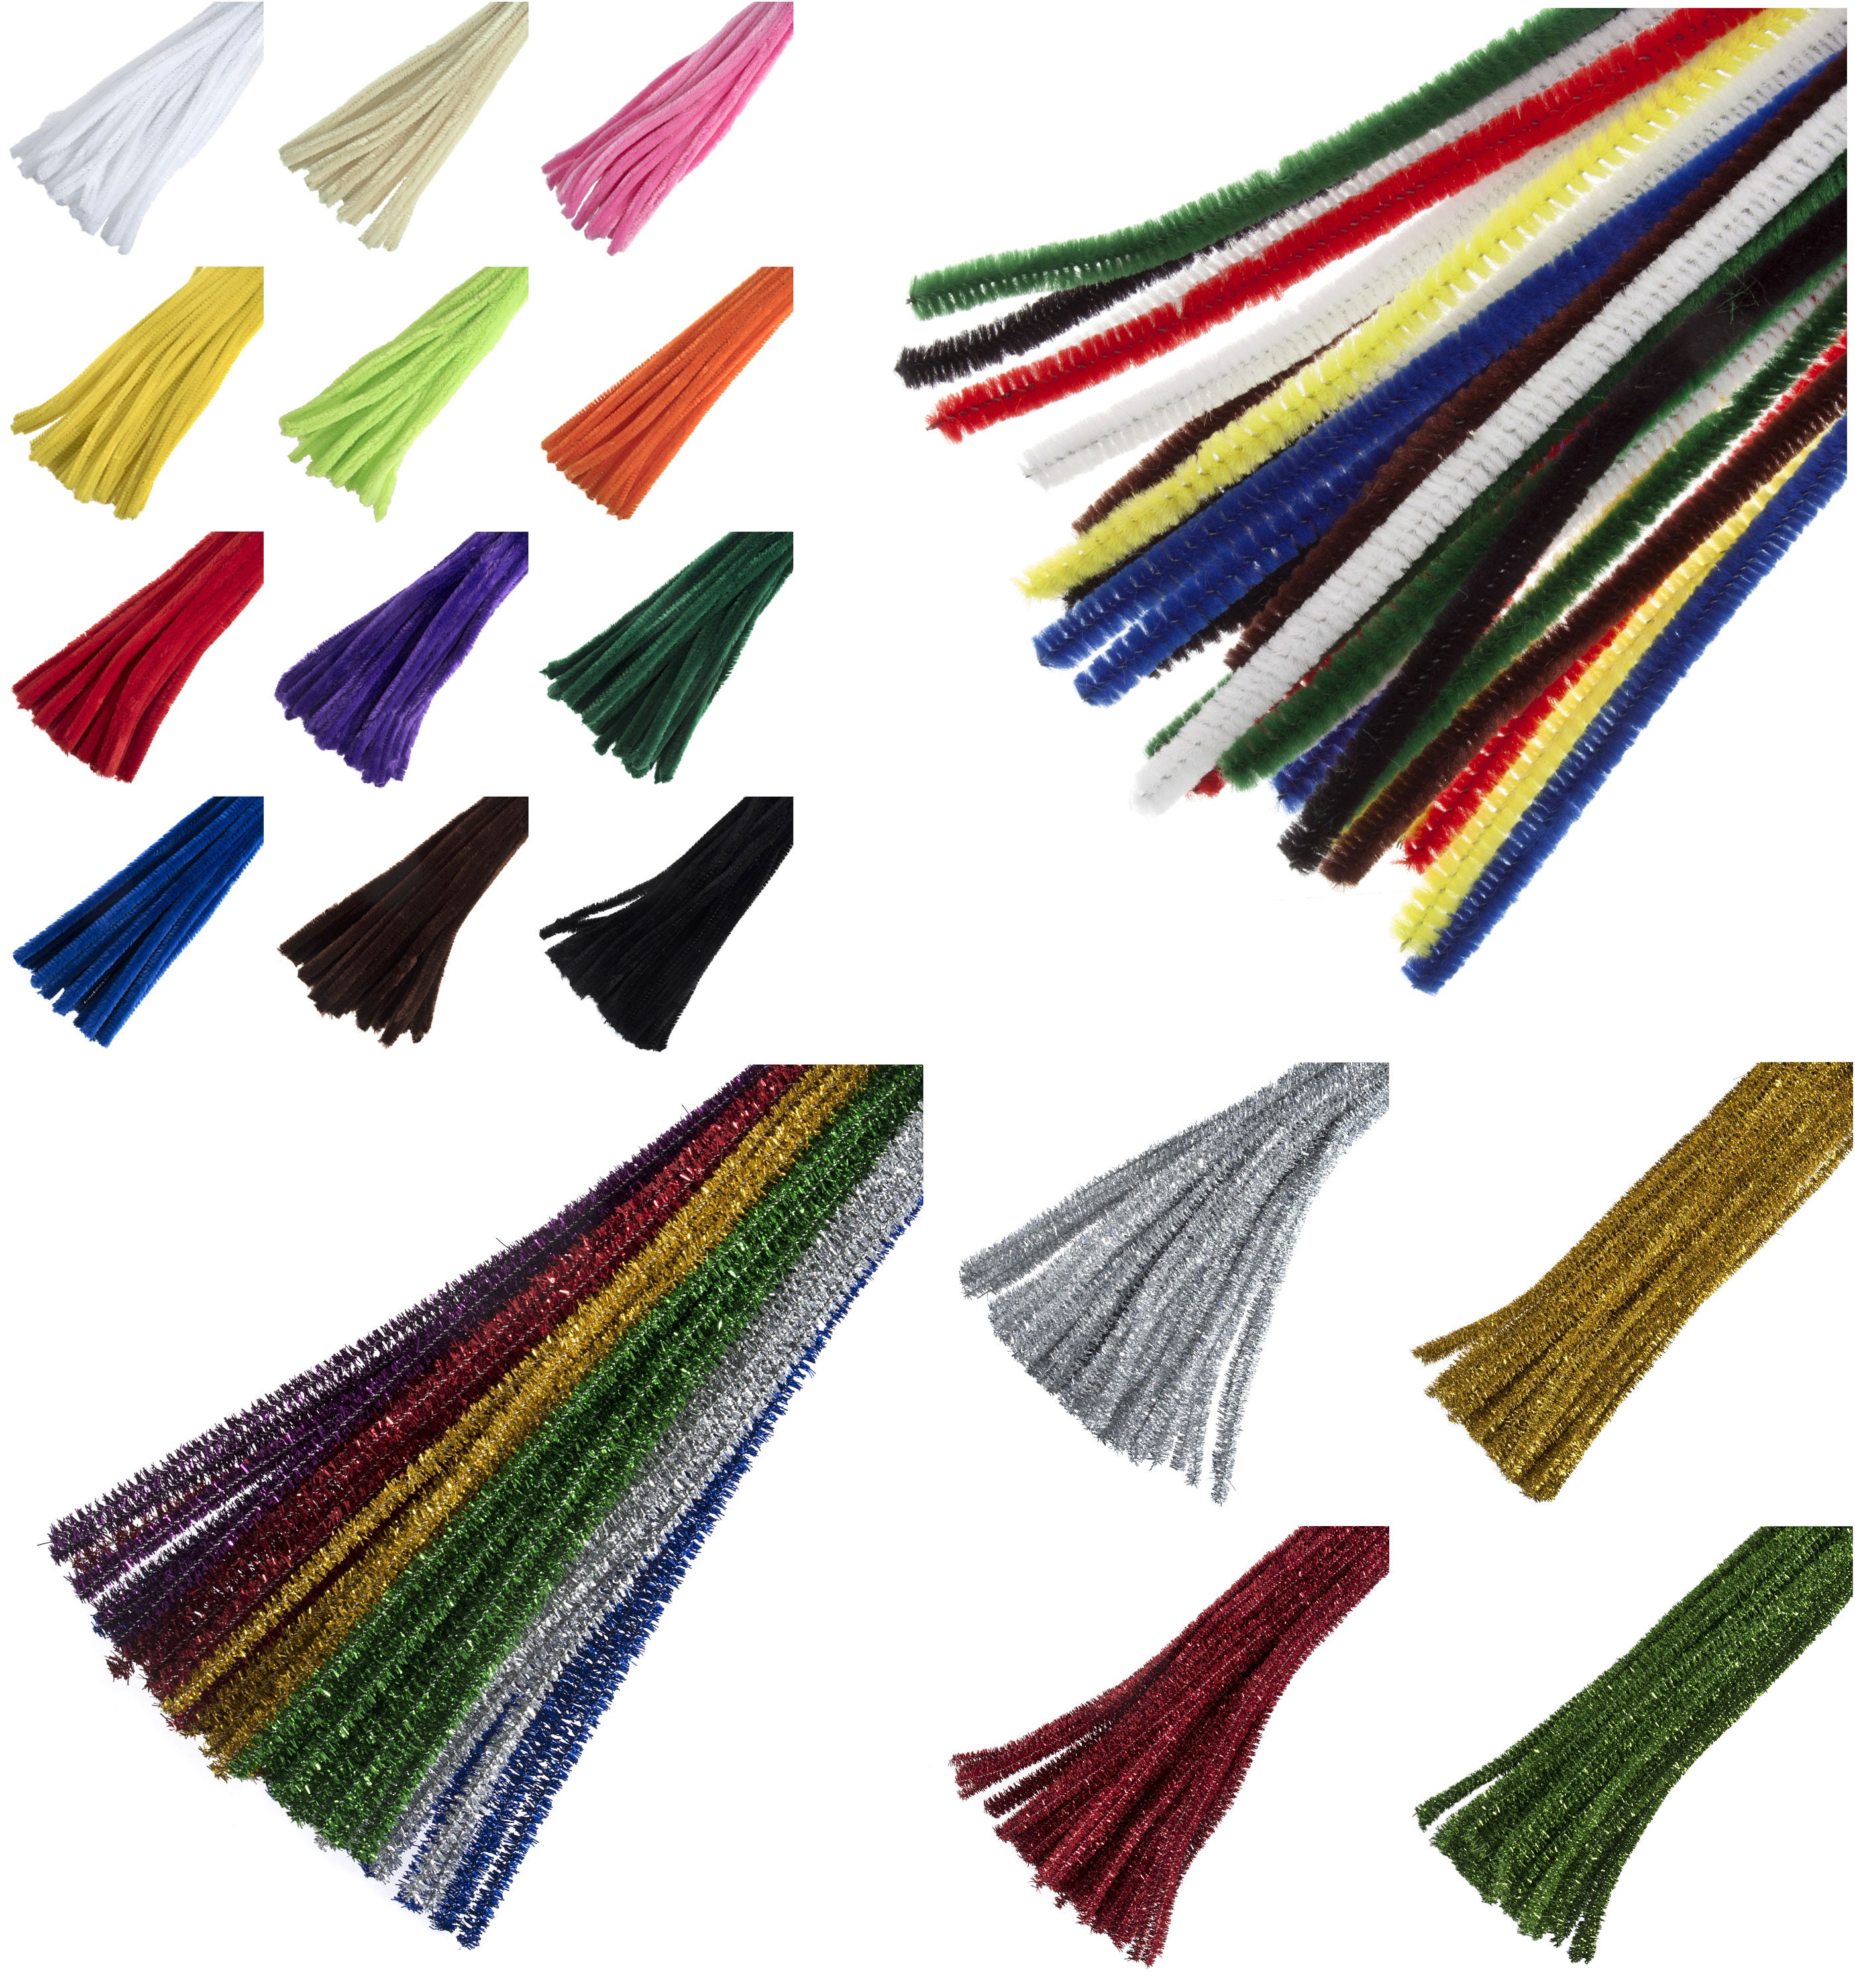  Caydo 20 Pieces Extra Thick Pipe Cleaners Craft